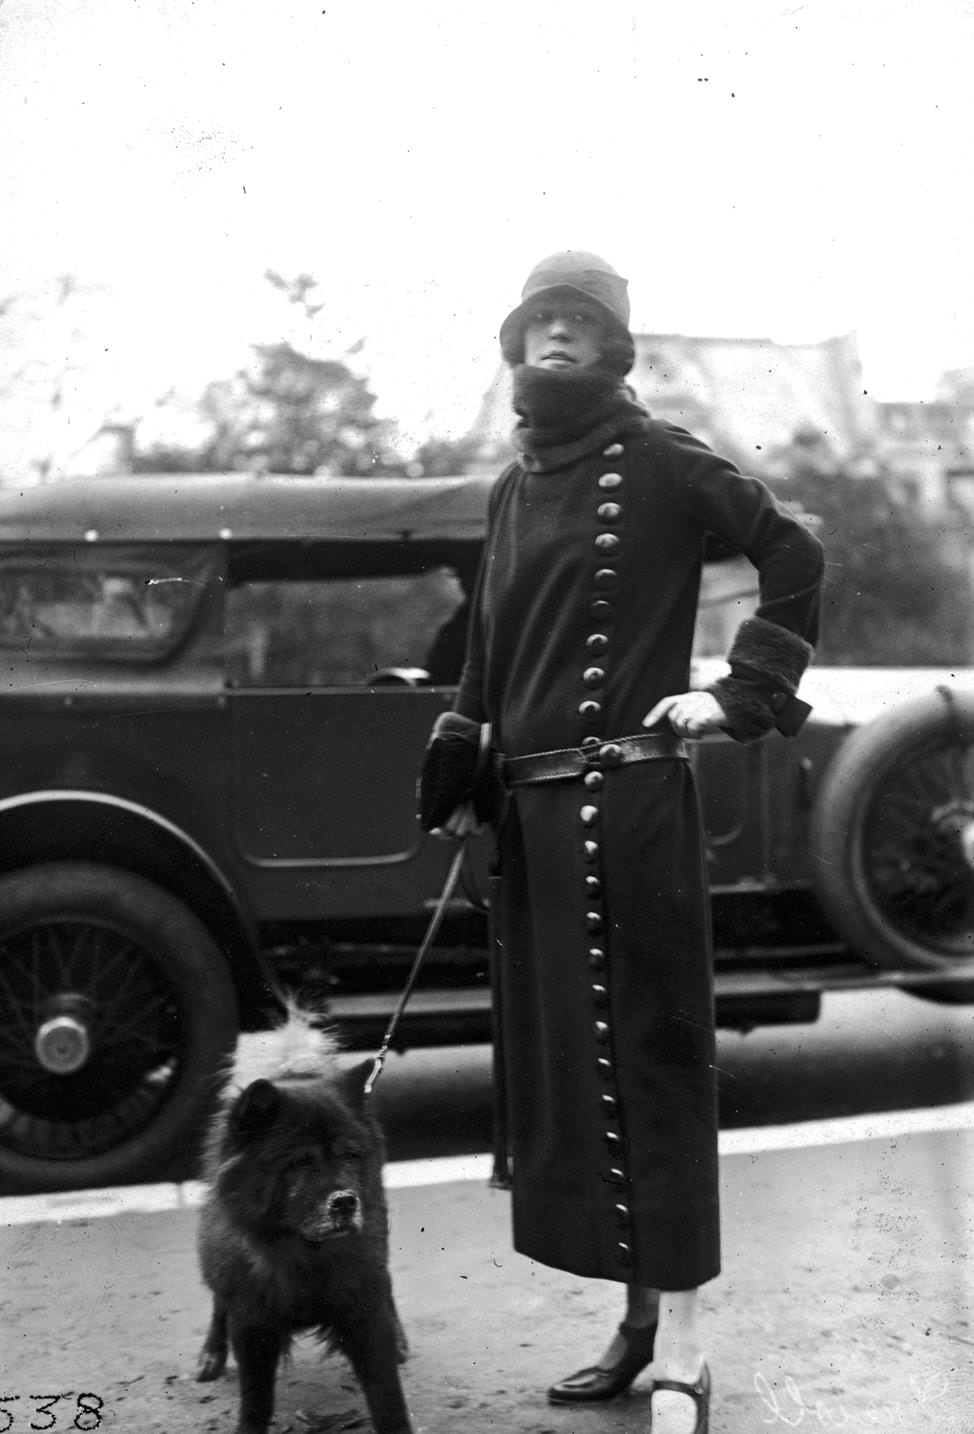 A Drecoll winter coat worn with a belt and with large buttons fastened from the neck to the hemline, 1920s